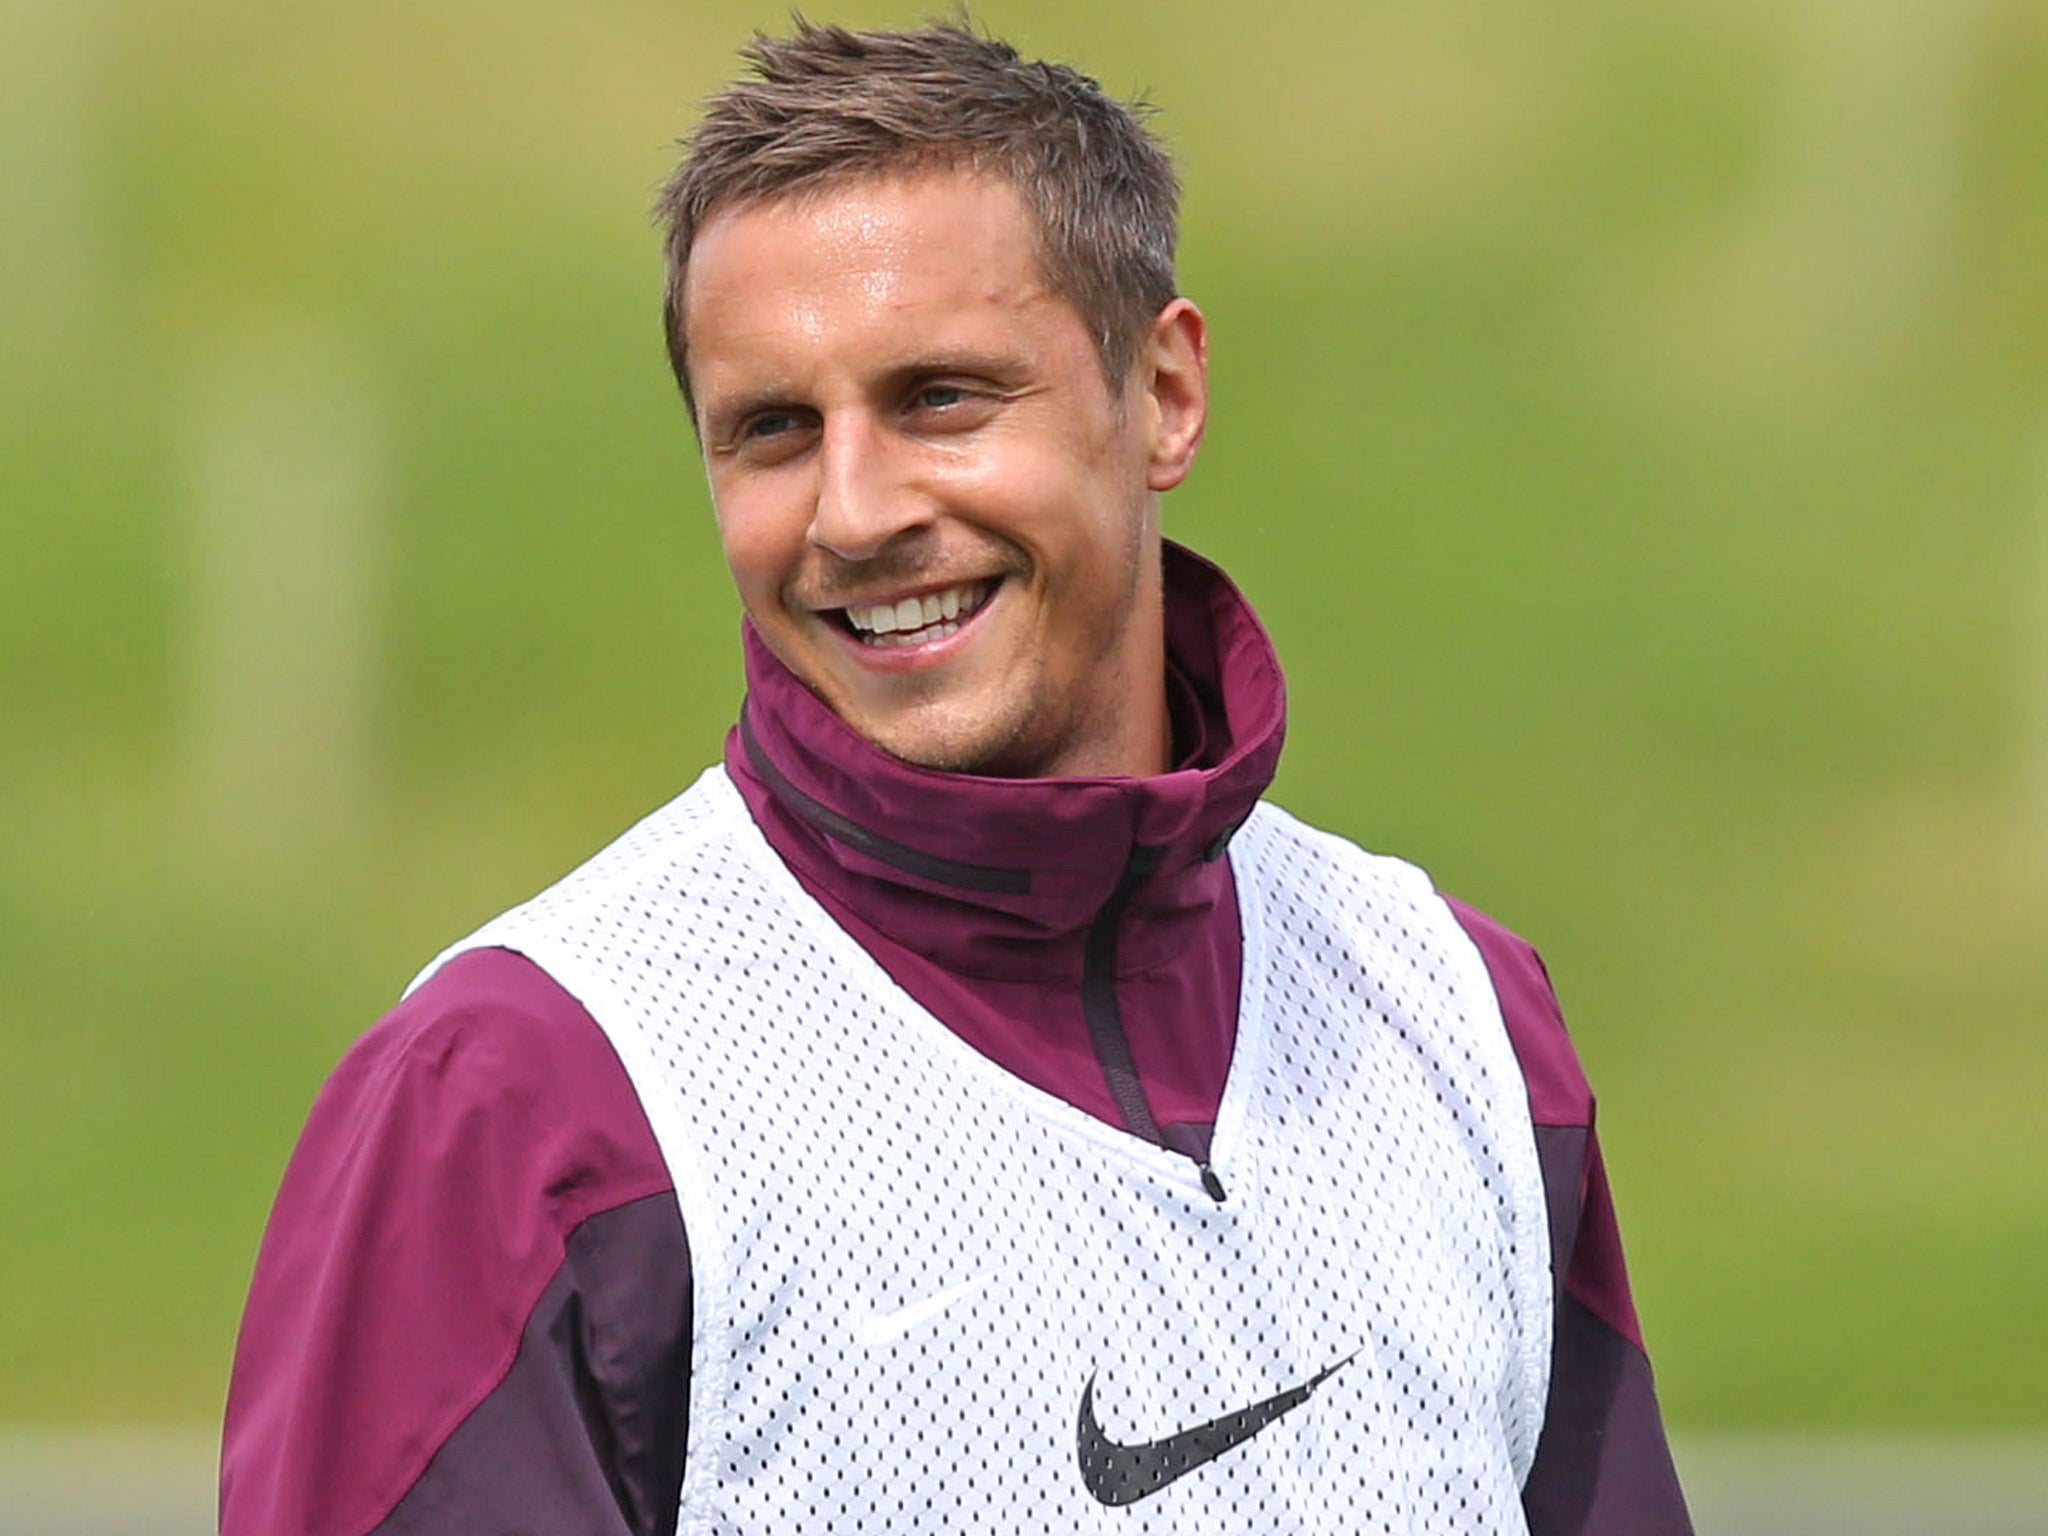 Phil Jagielka in relaxed mood during training